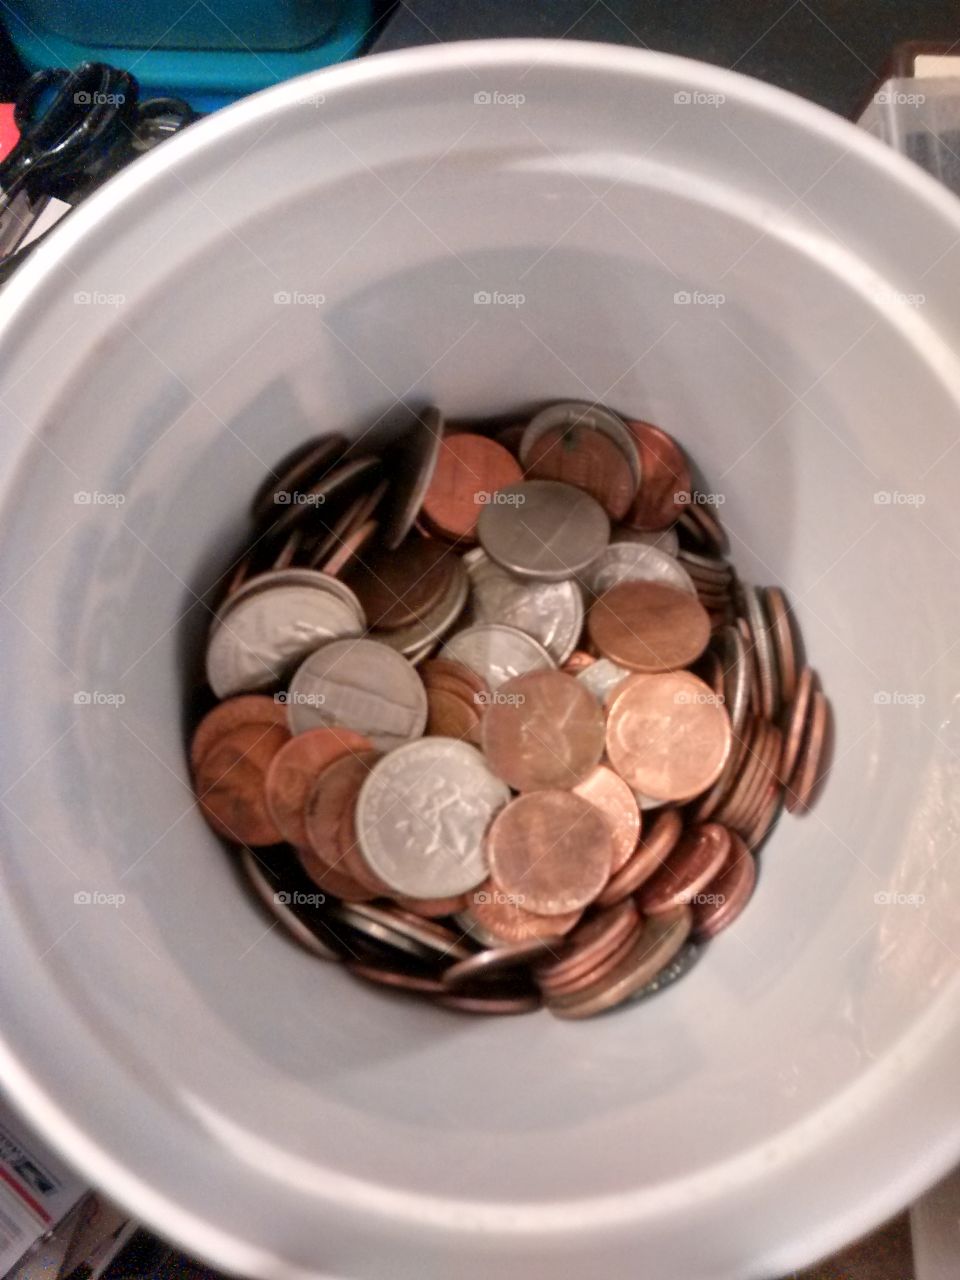 Cup full of coins